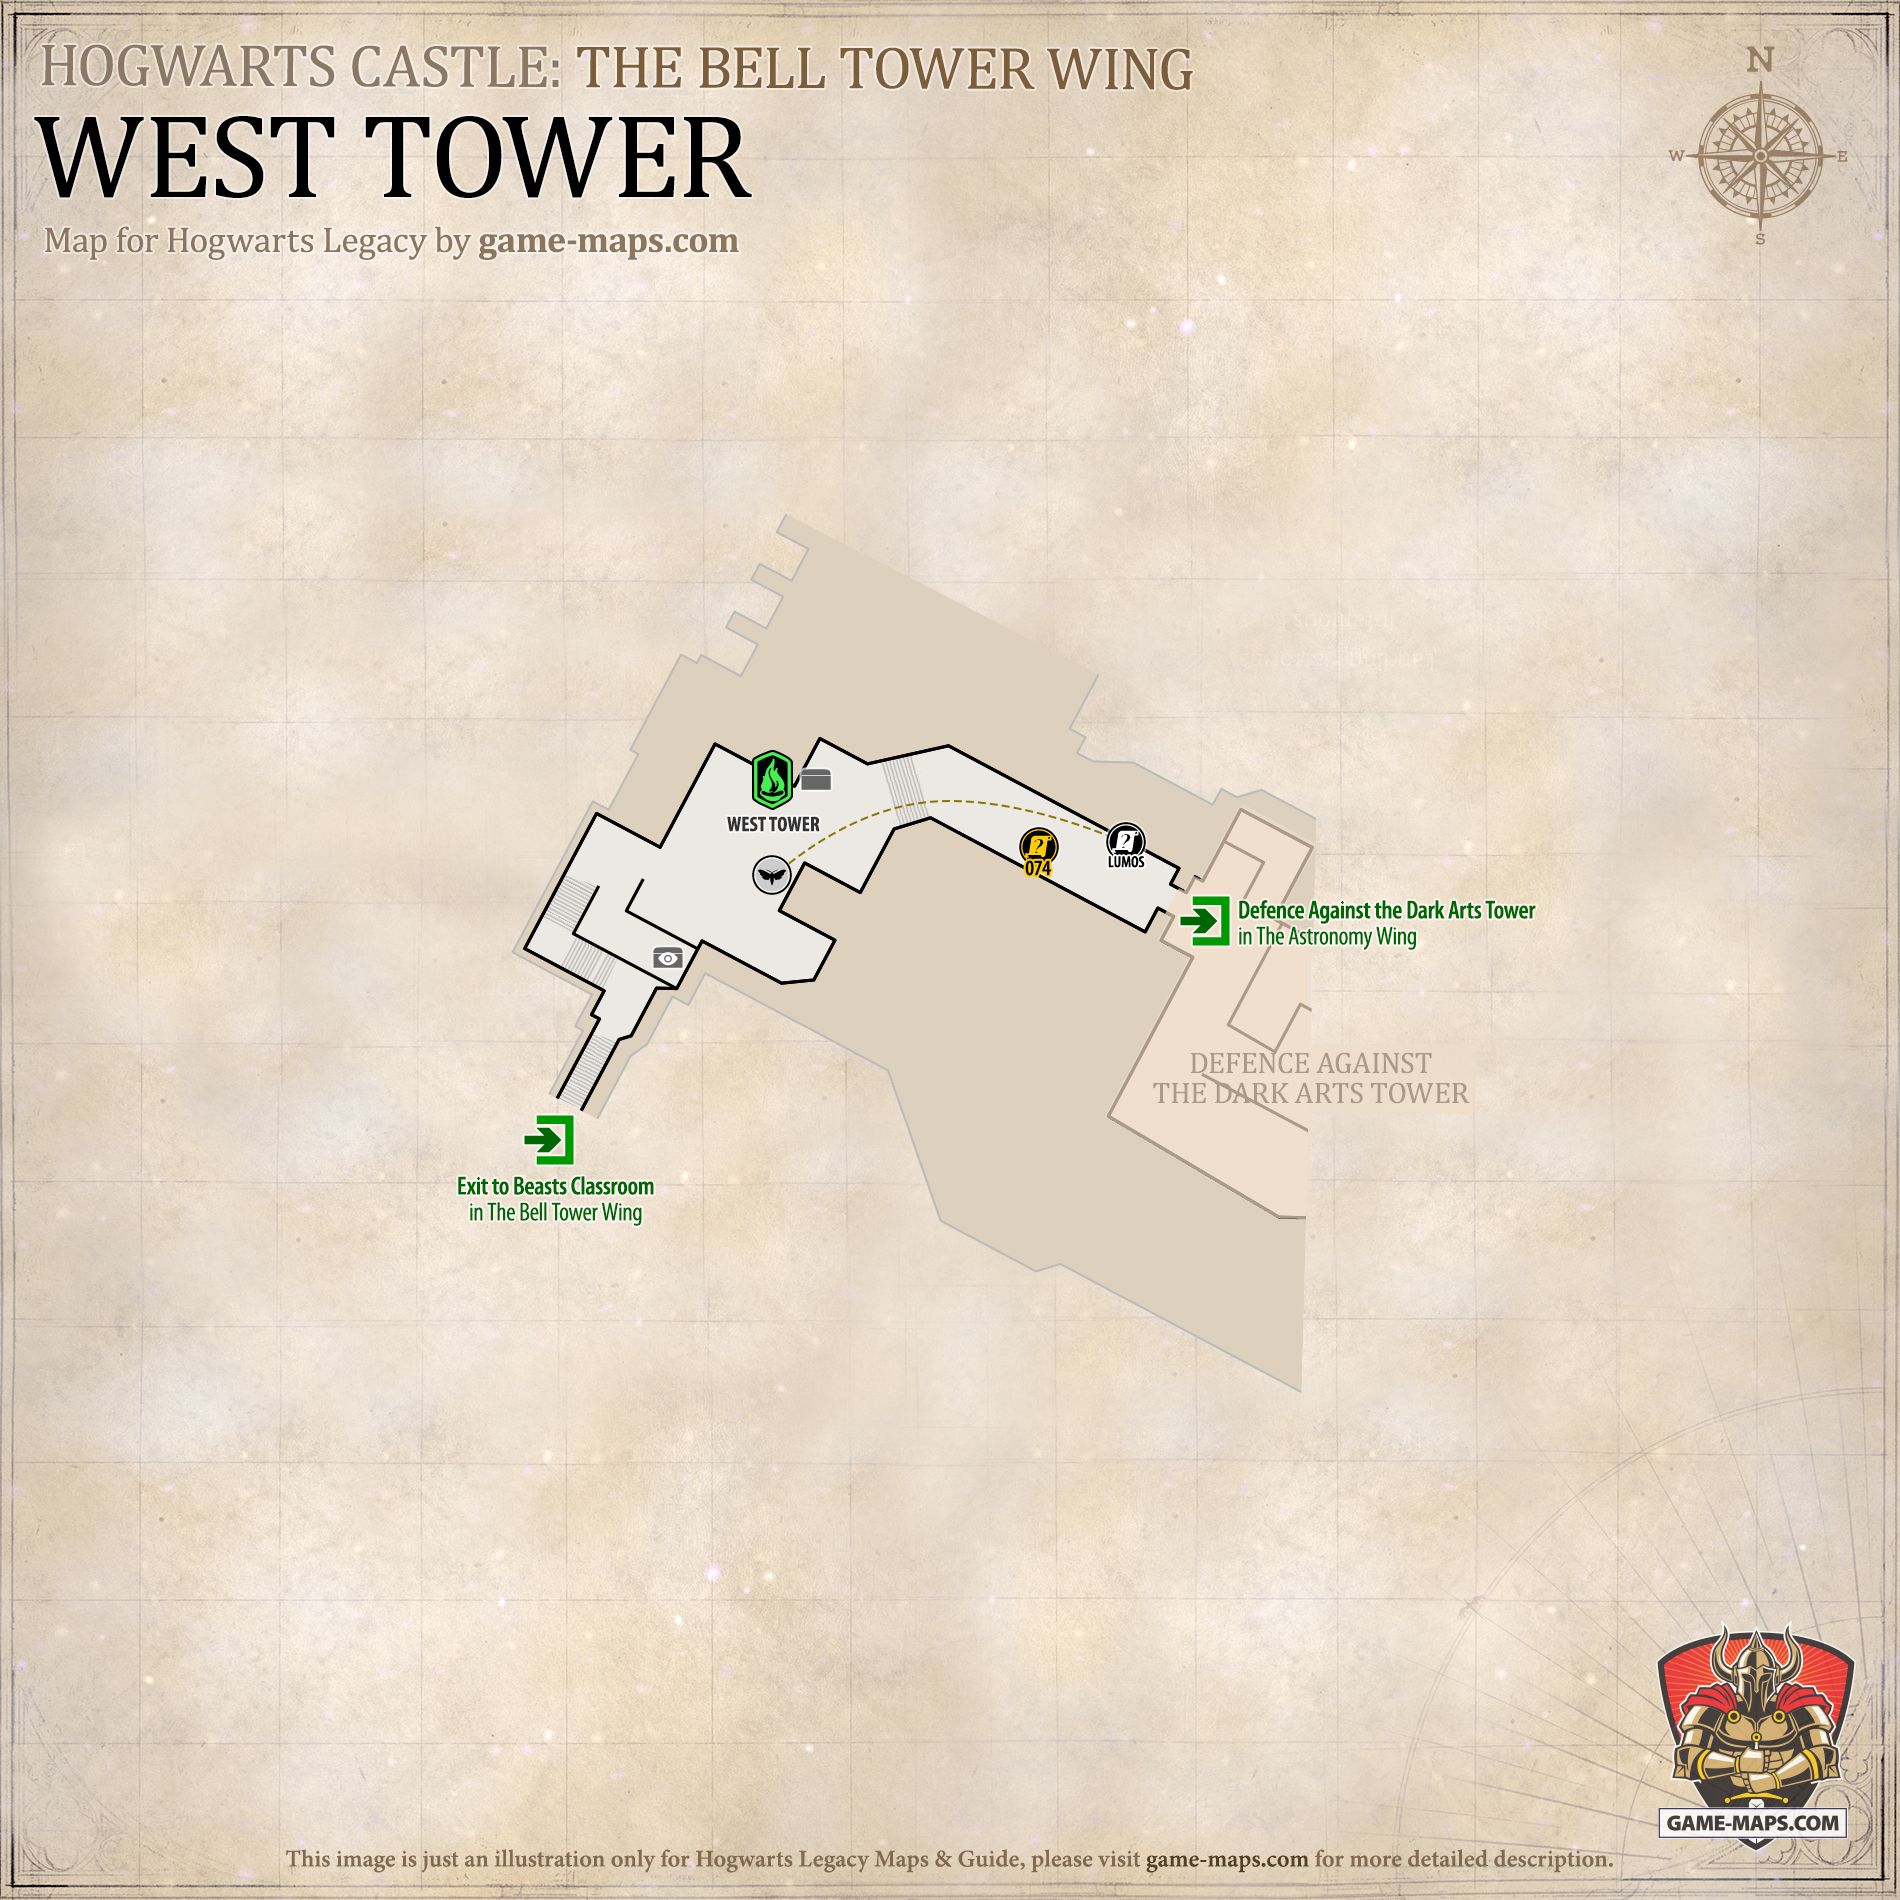 West Tower Map for Hogwarts Legacy